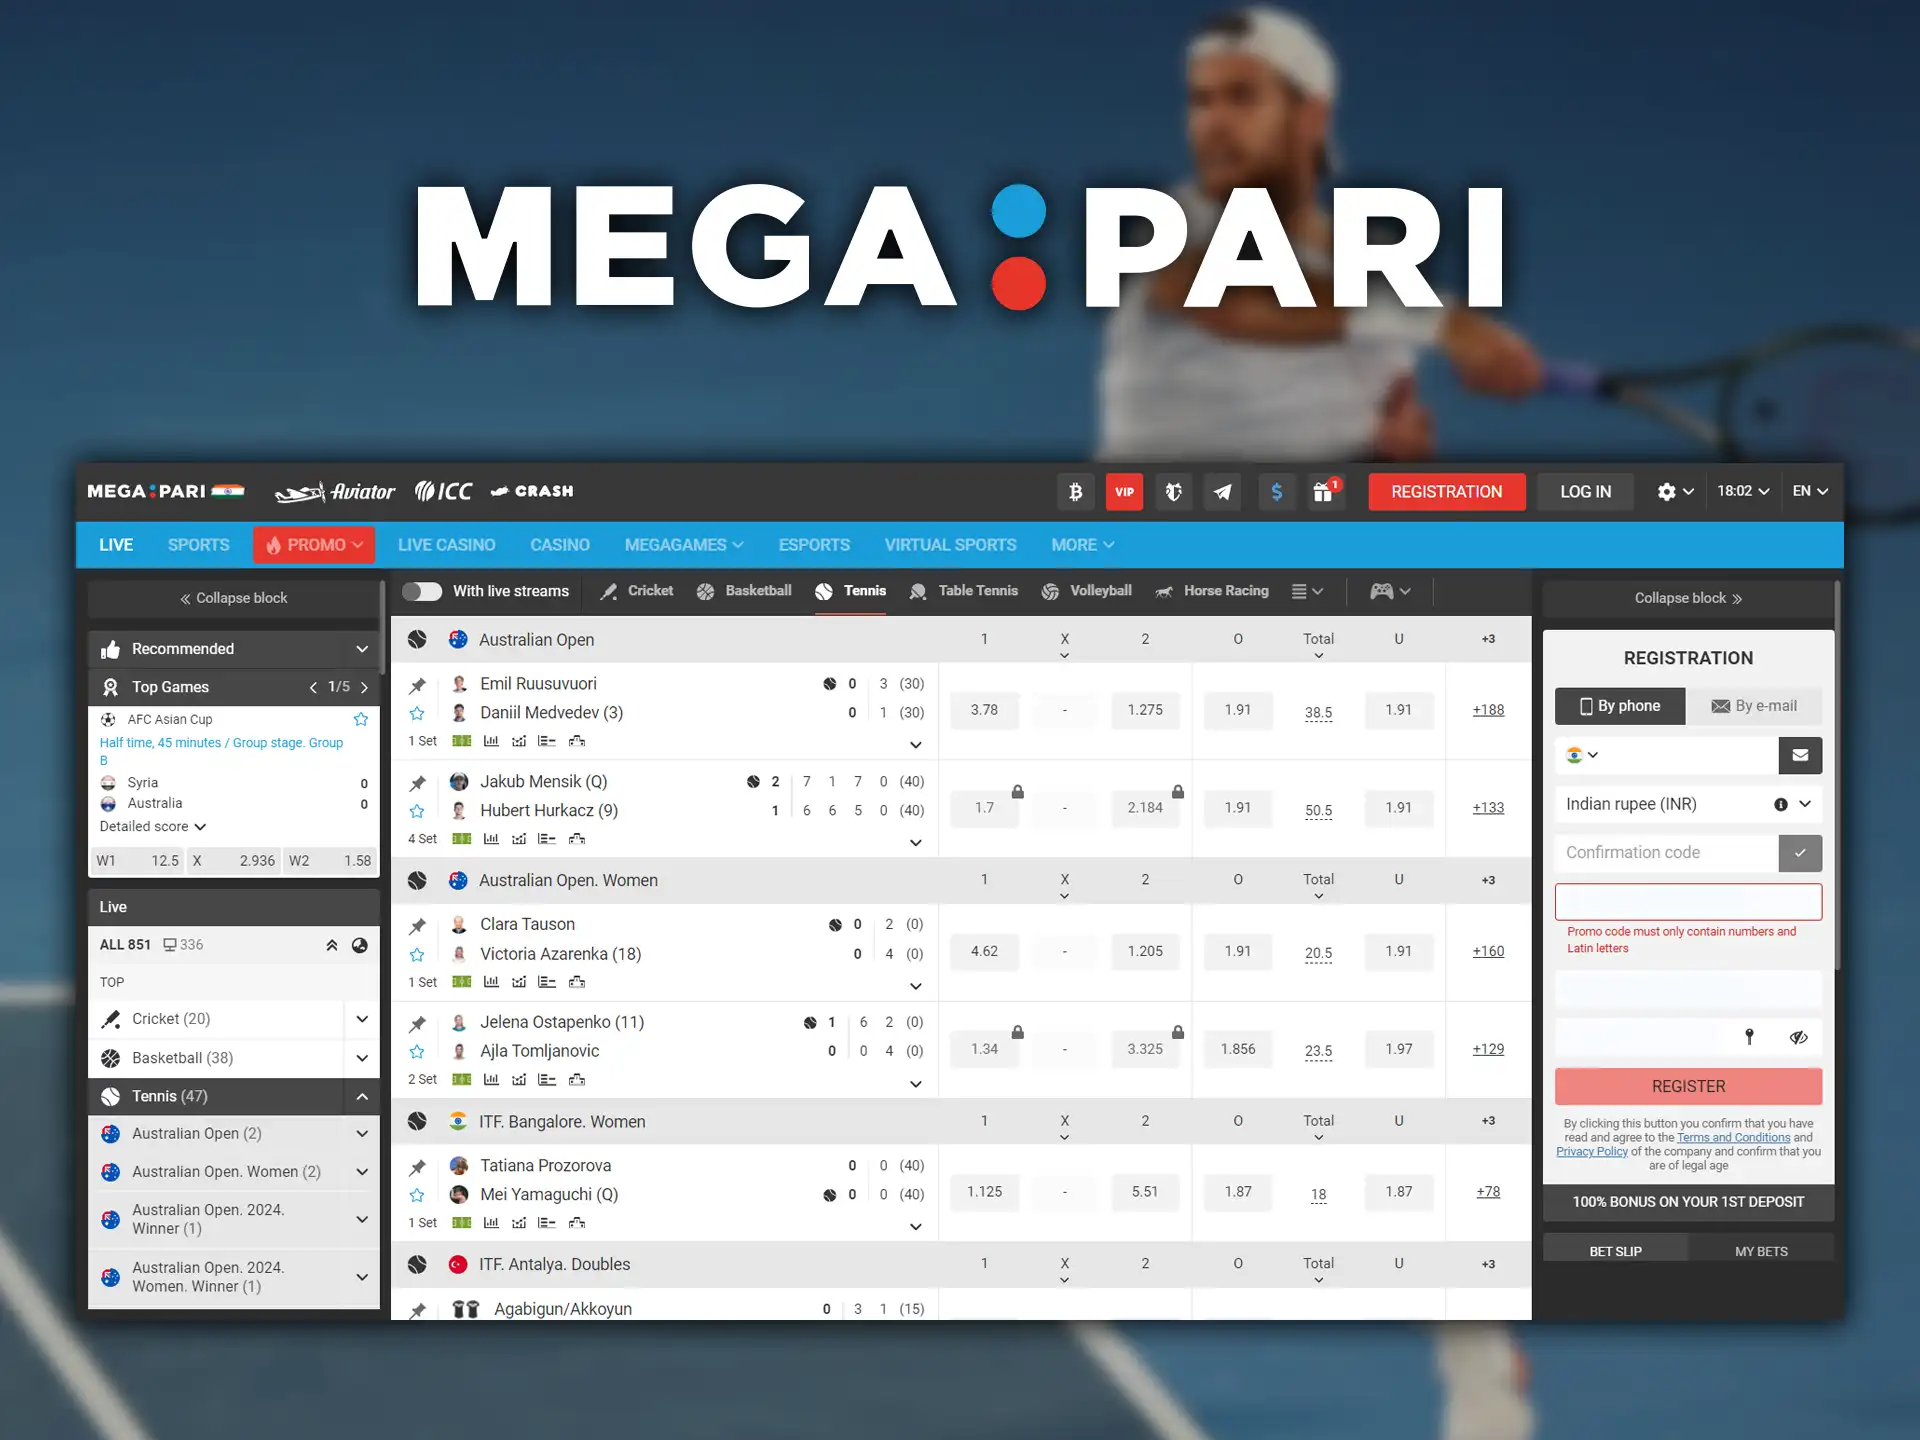 Megapari is popular among Indian players for live streaming of all tennis matches.